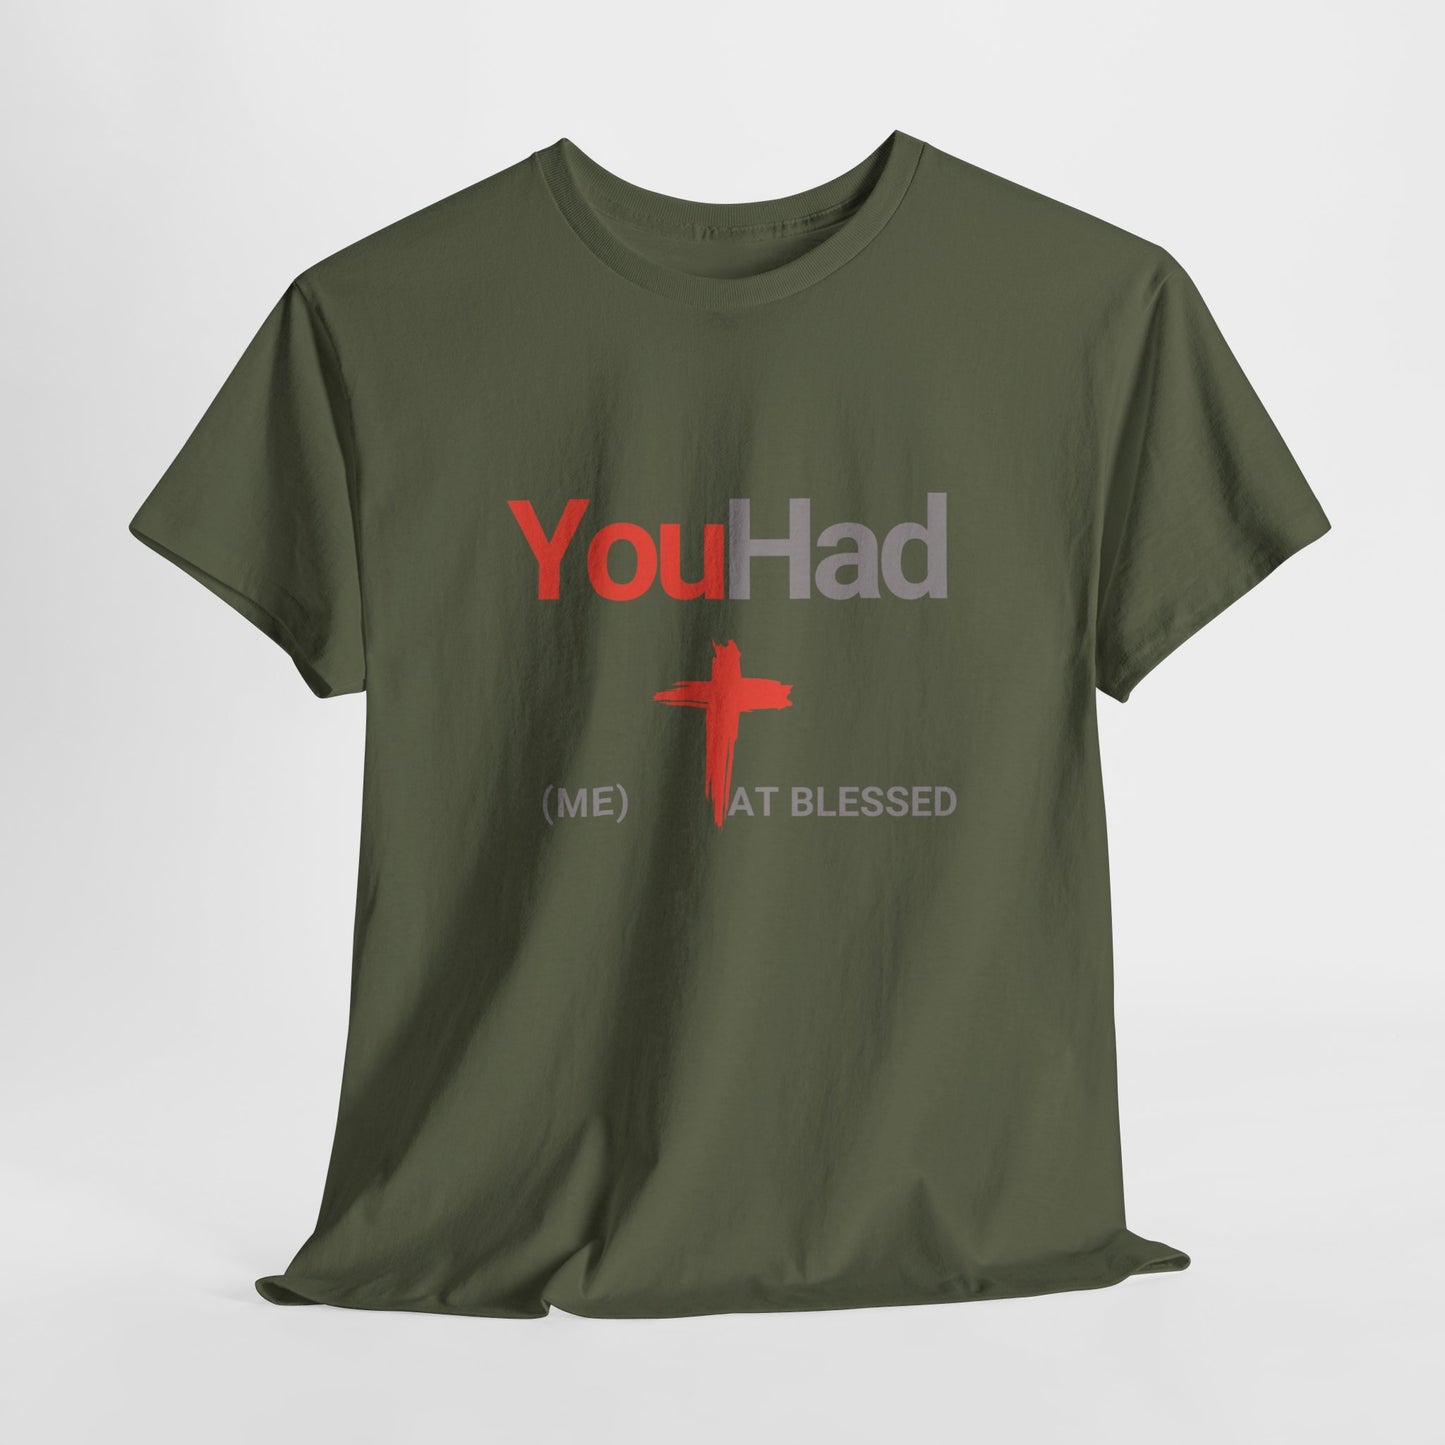 "You Had Me at Blessed" Unisex Tee